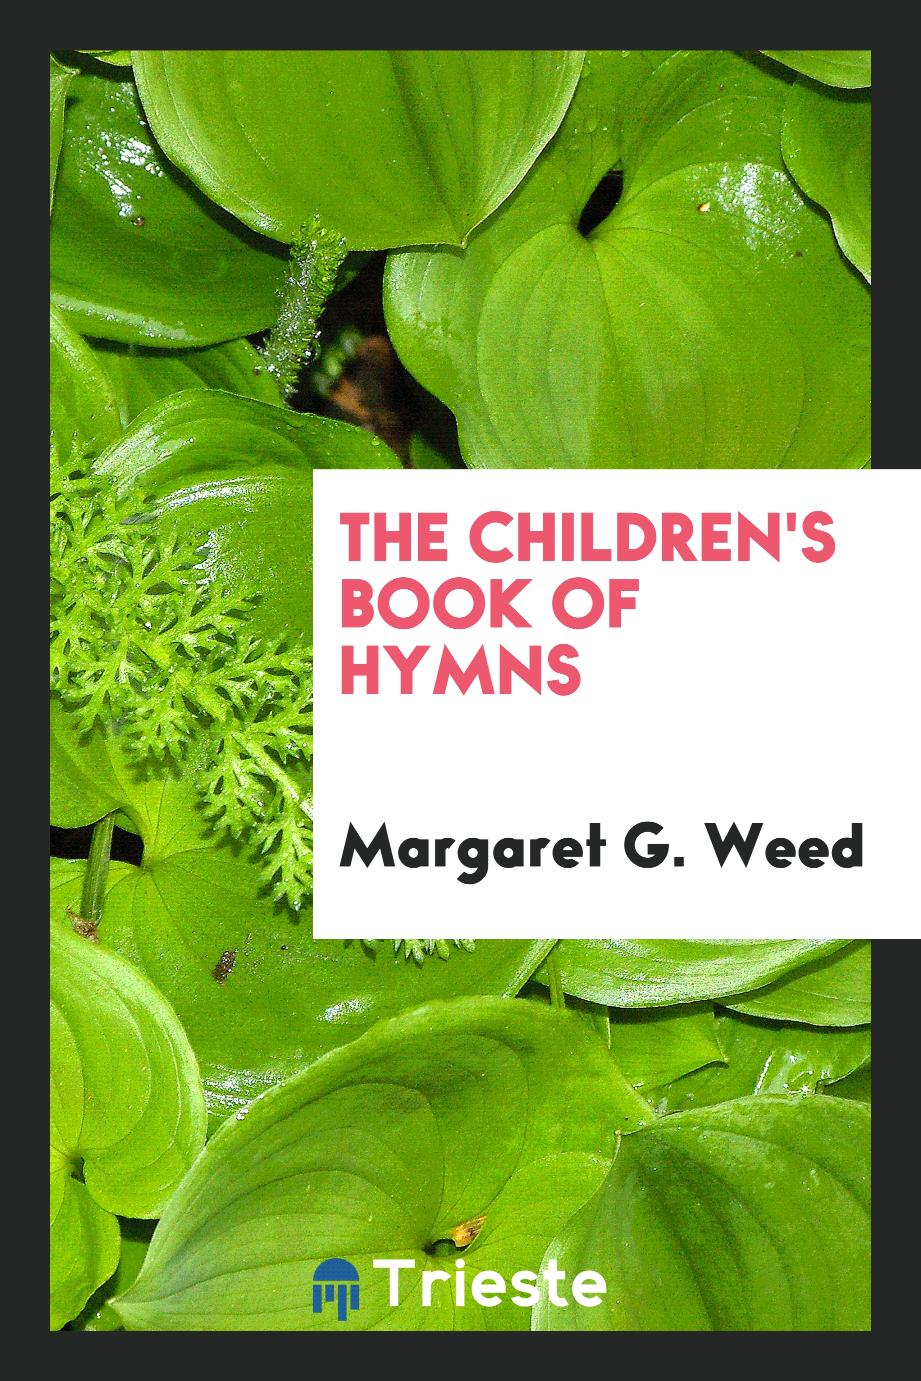 The Children's book of hymns